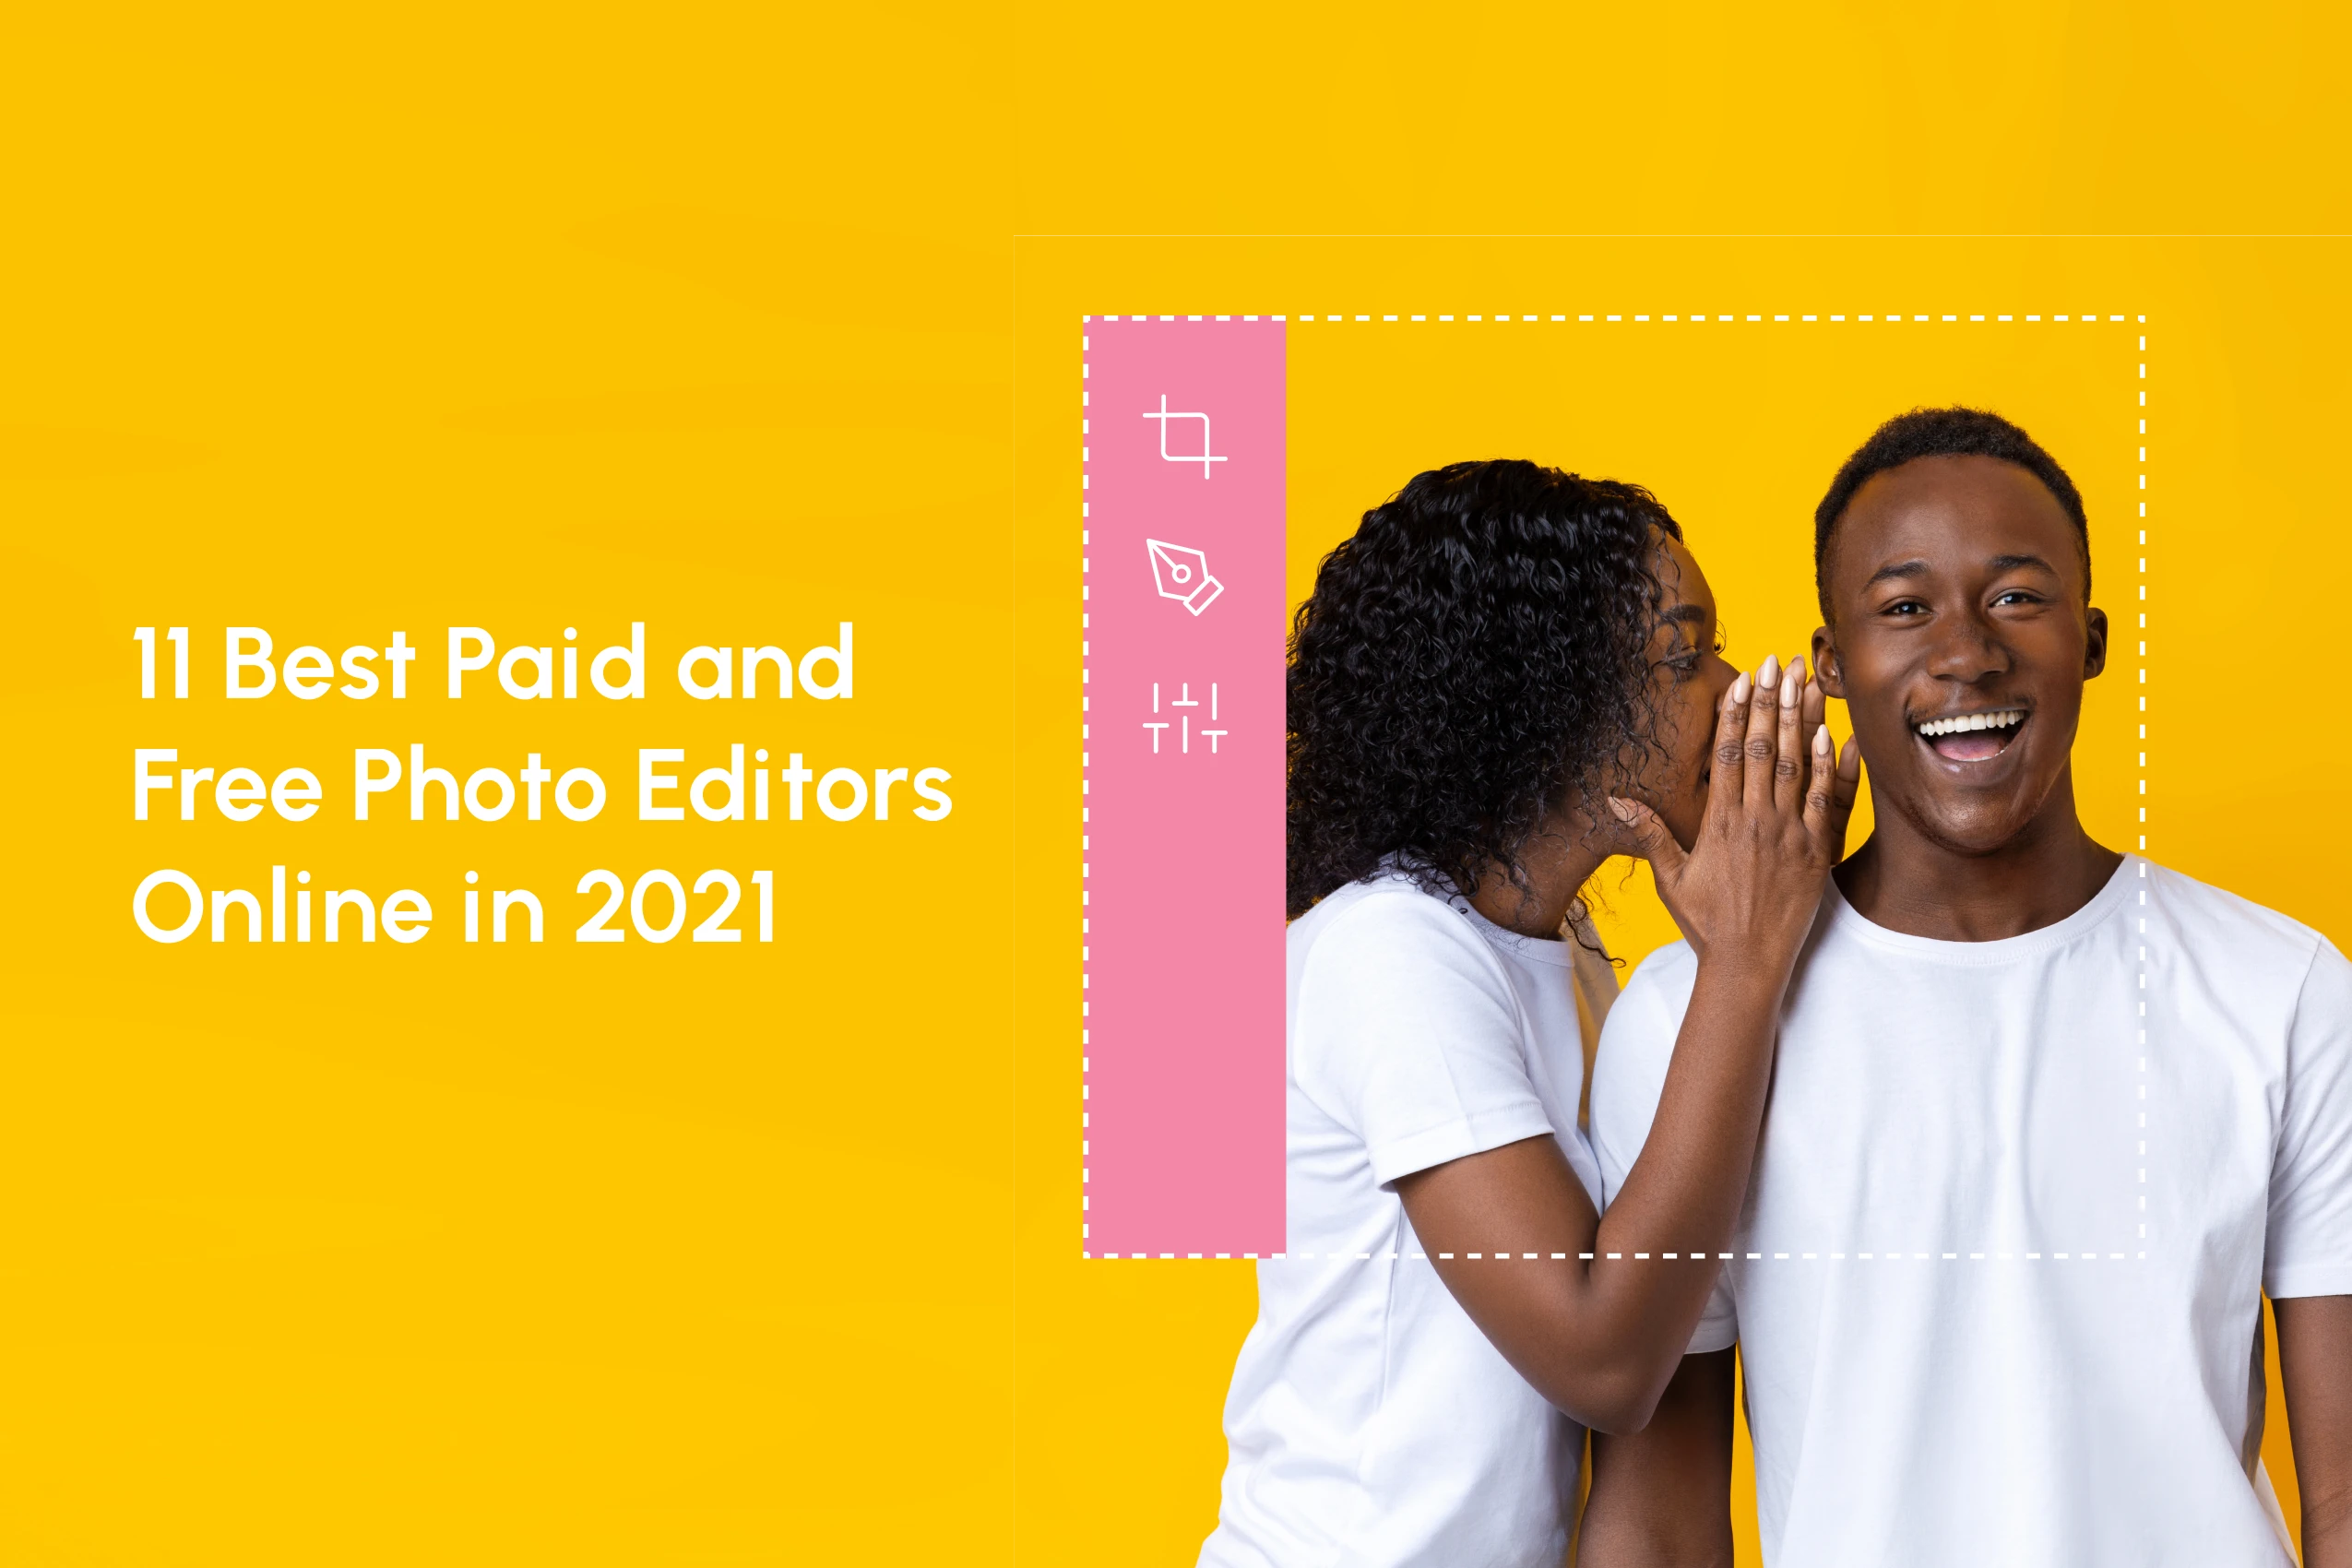 11 Best Paid and Free Photo Editors Online in 2021